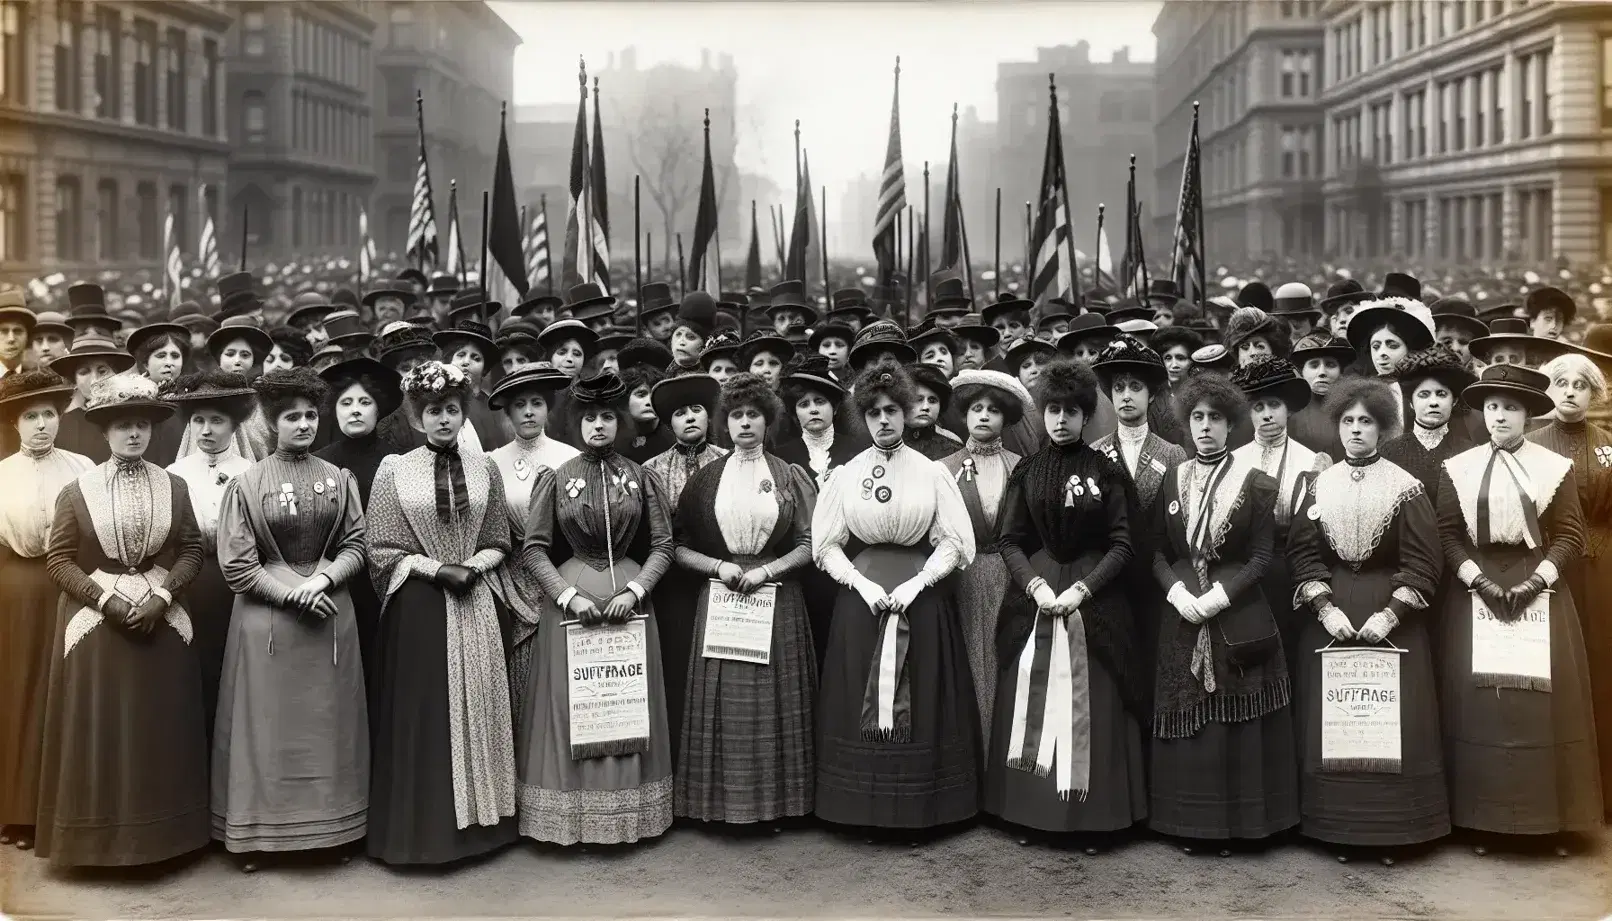 Group of multi-ethnic women in period clothing participate in a rally for women's suffrage, with determined and hopeful looks.